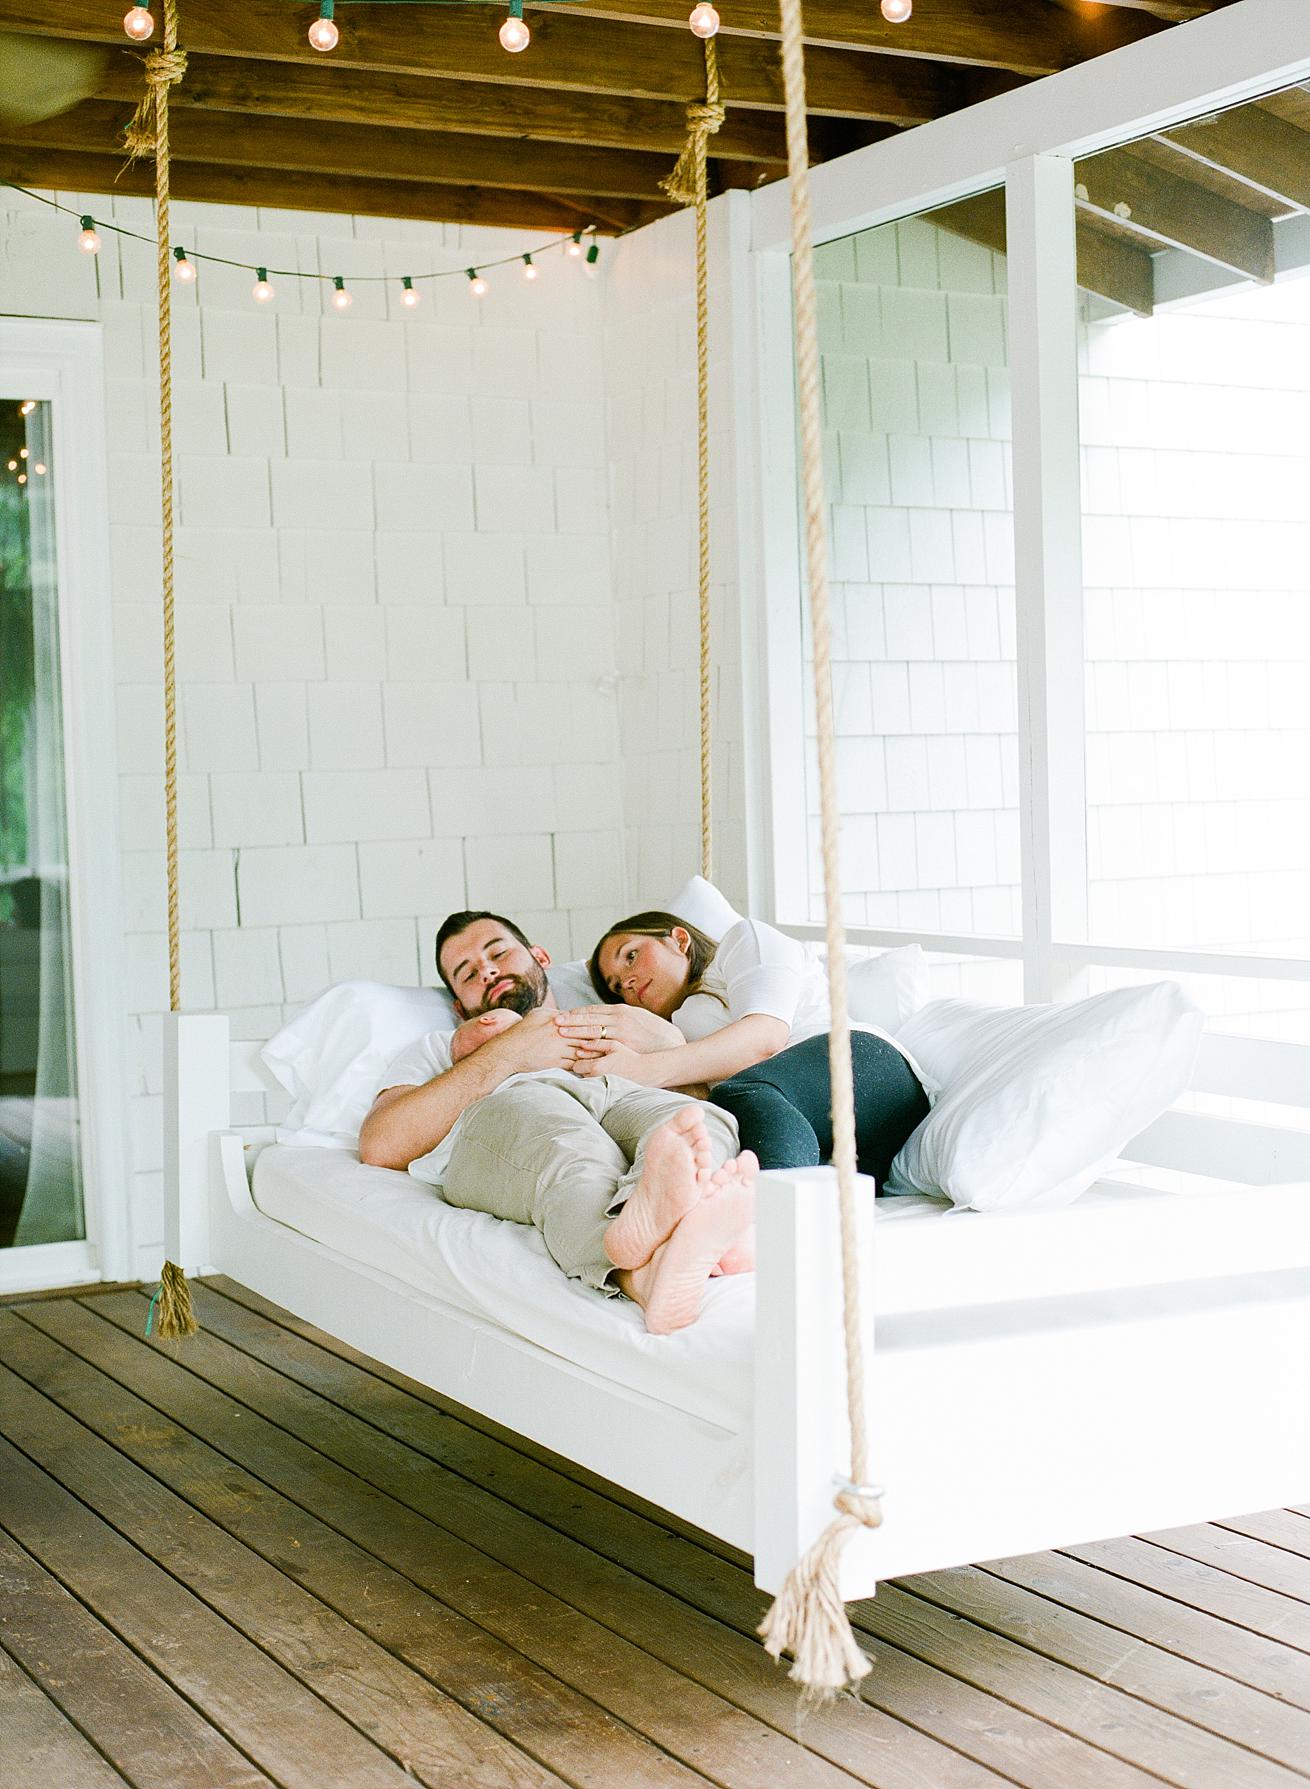 homemade porch swing bed